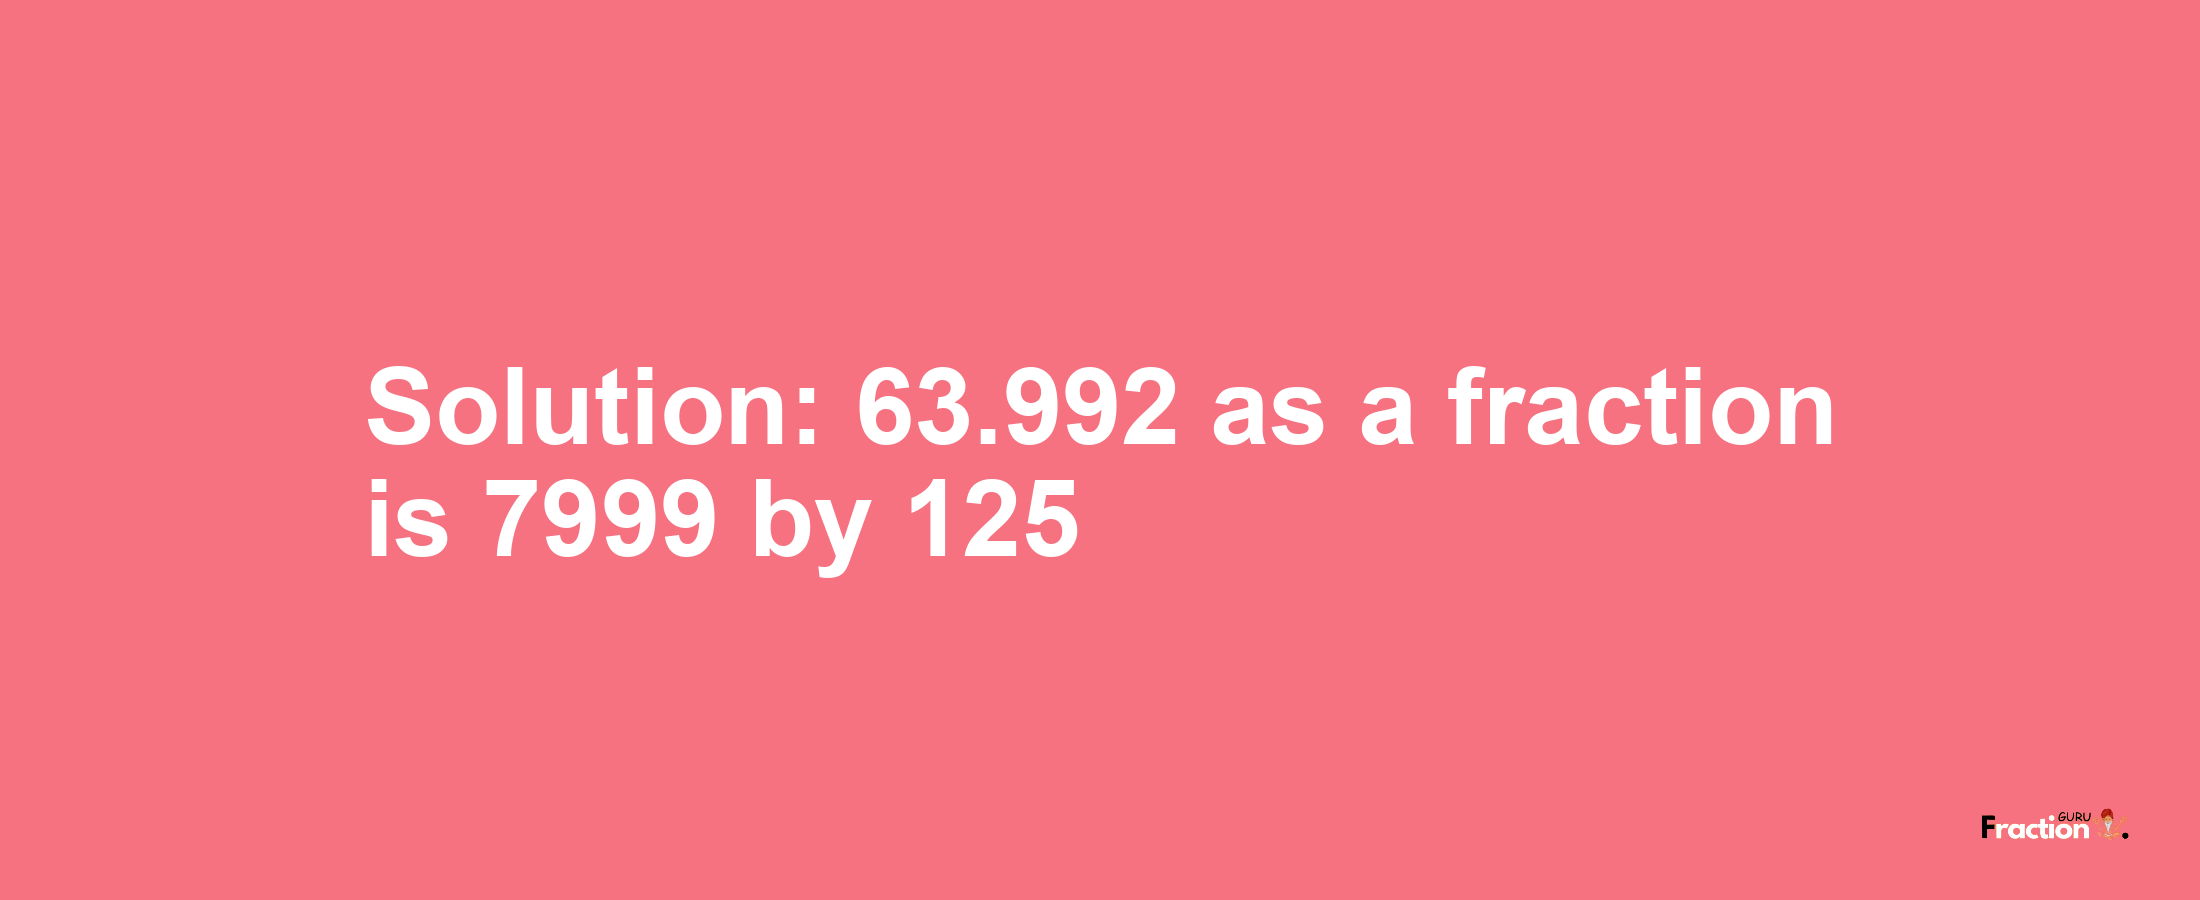 Solution:63.992 as a fraction is 7999/125